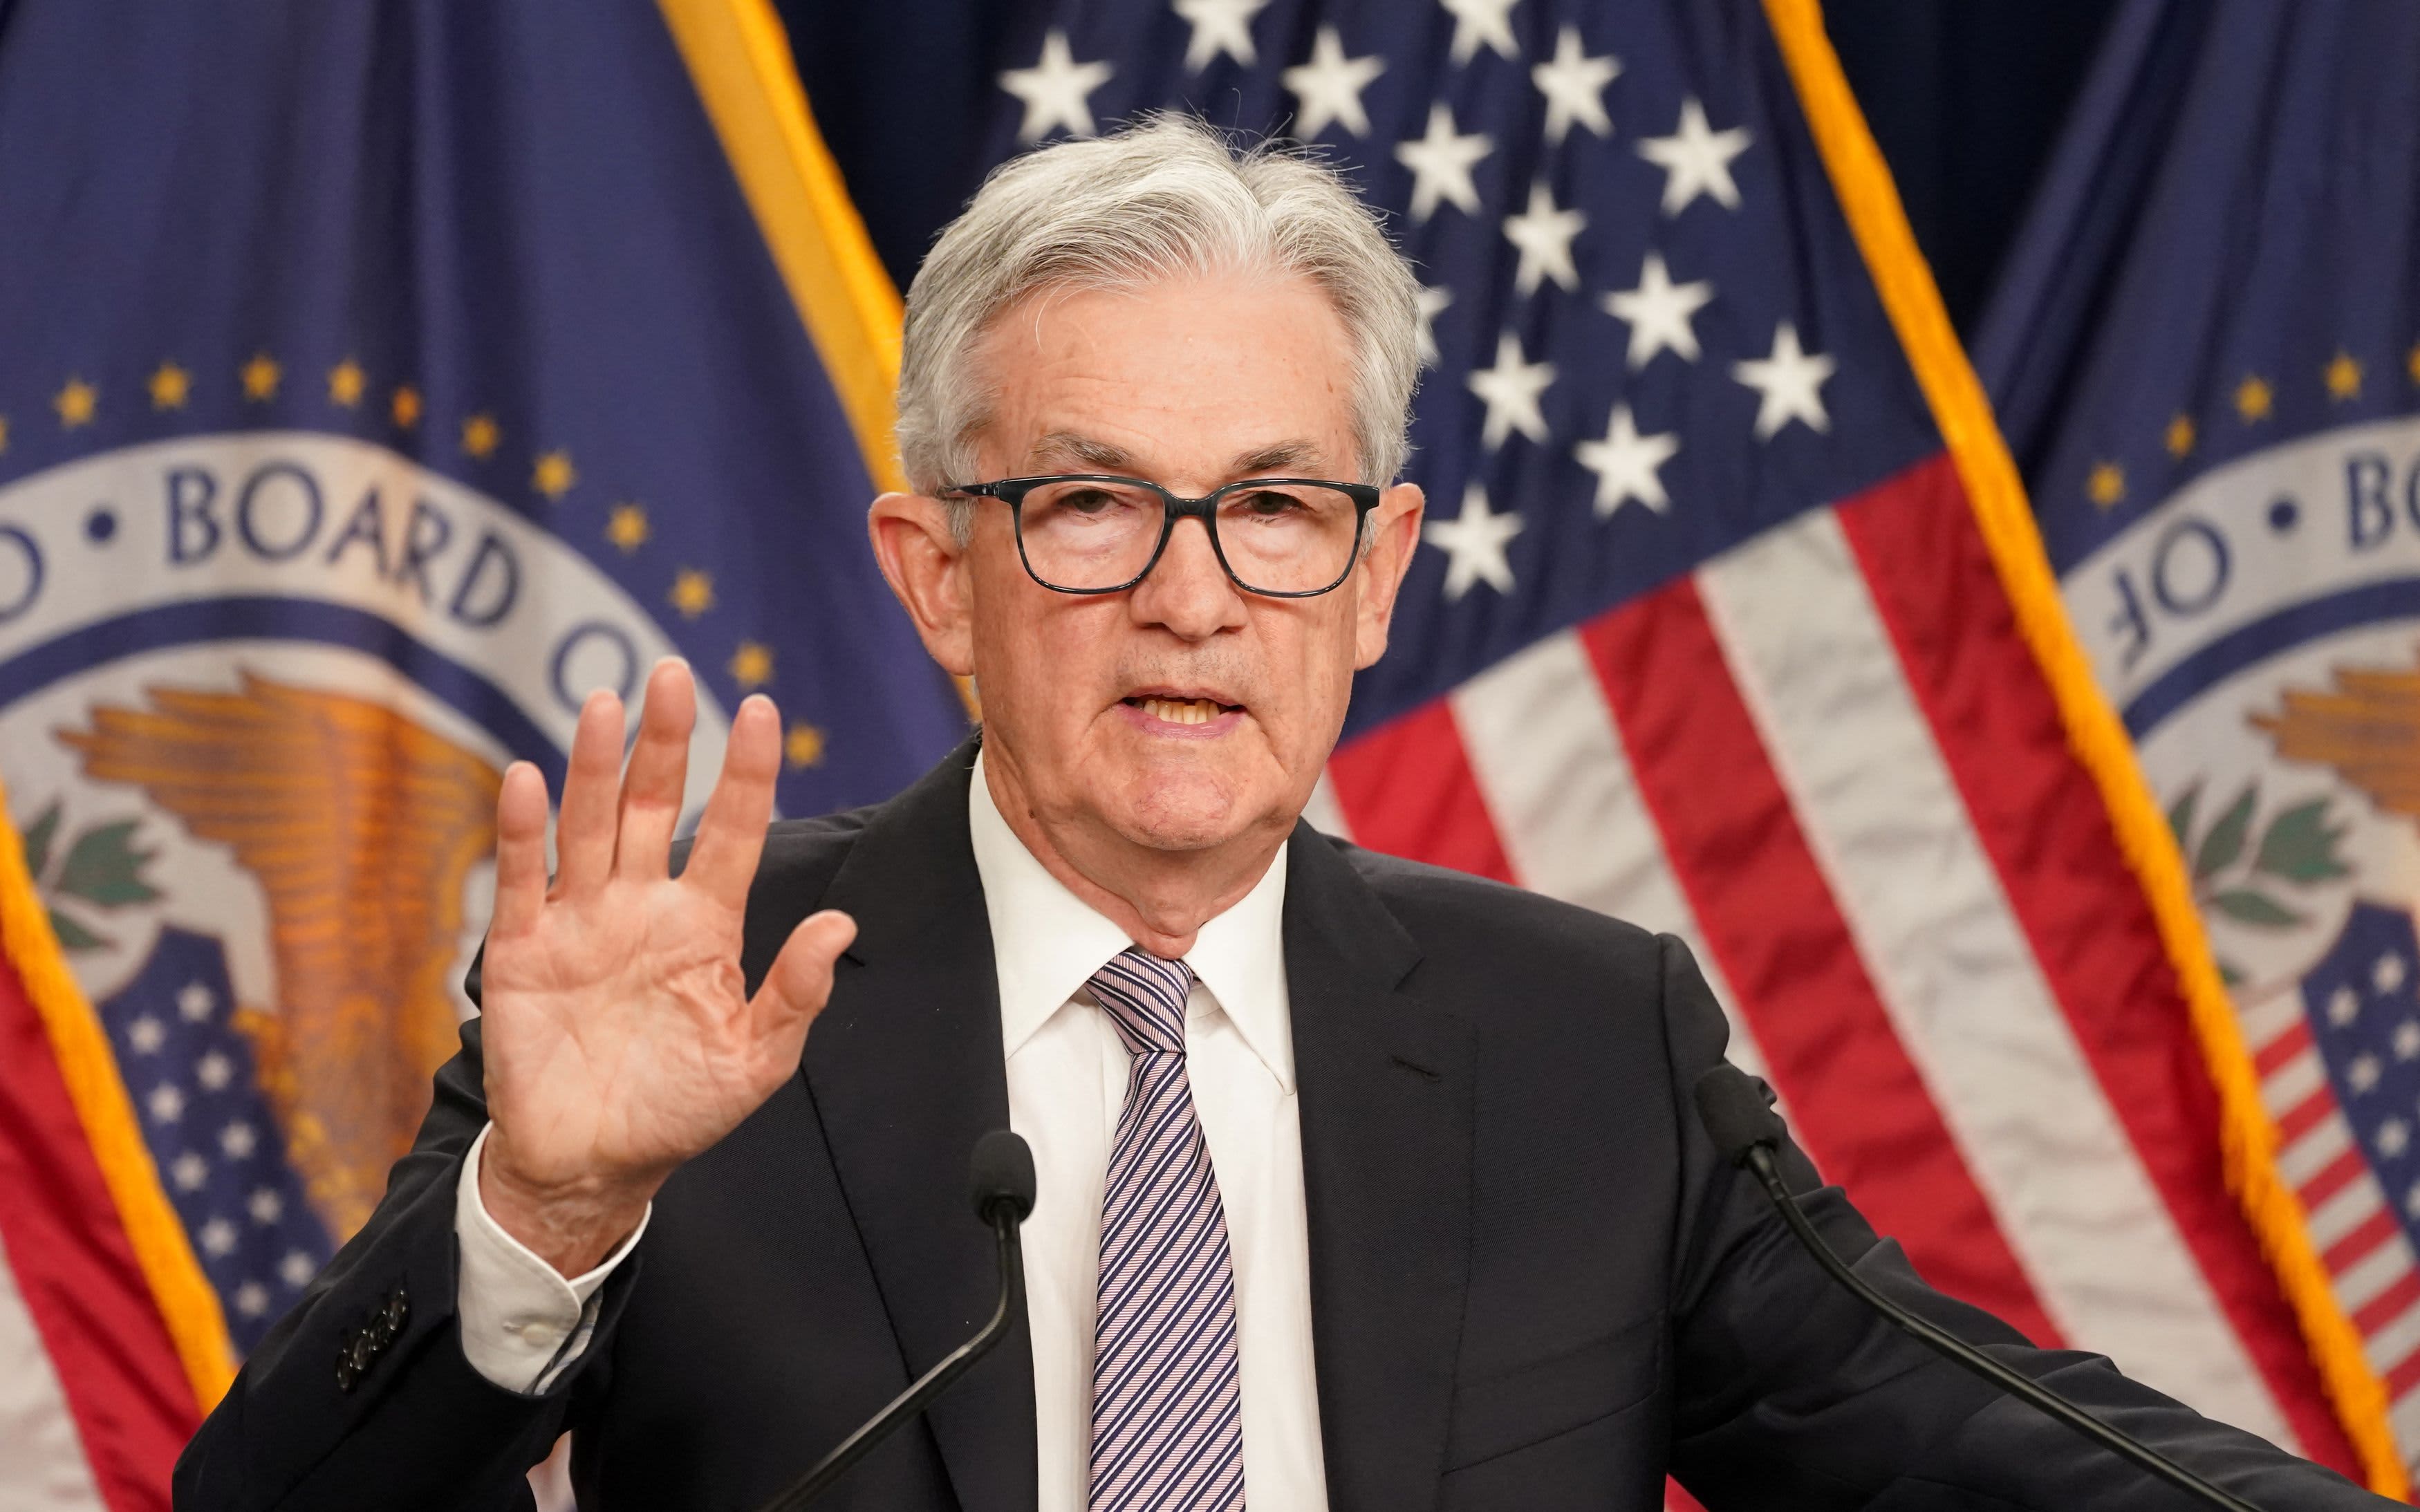 Fed chief Powell says interest rates may not have to rise as much as expected to curb inflation